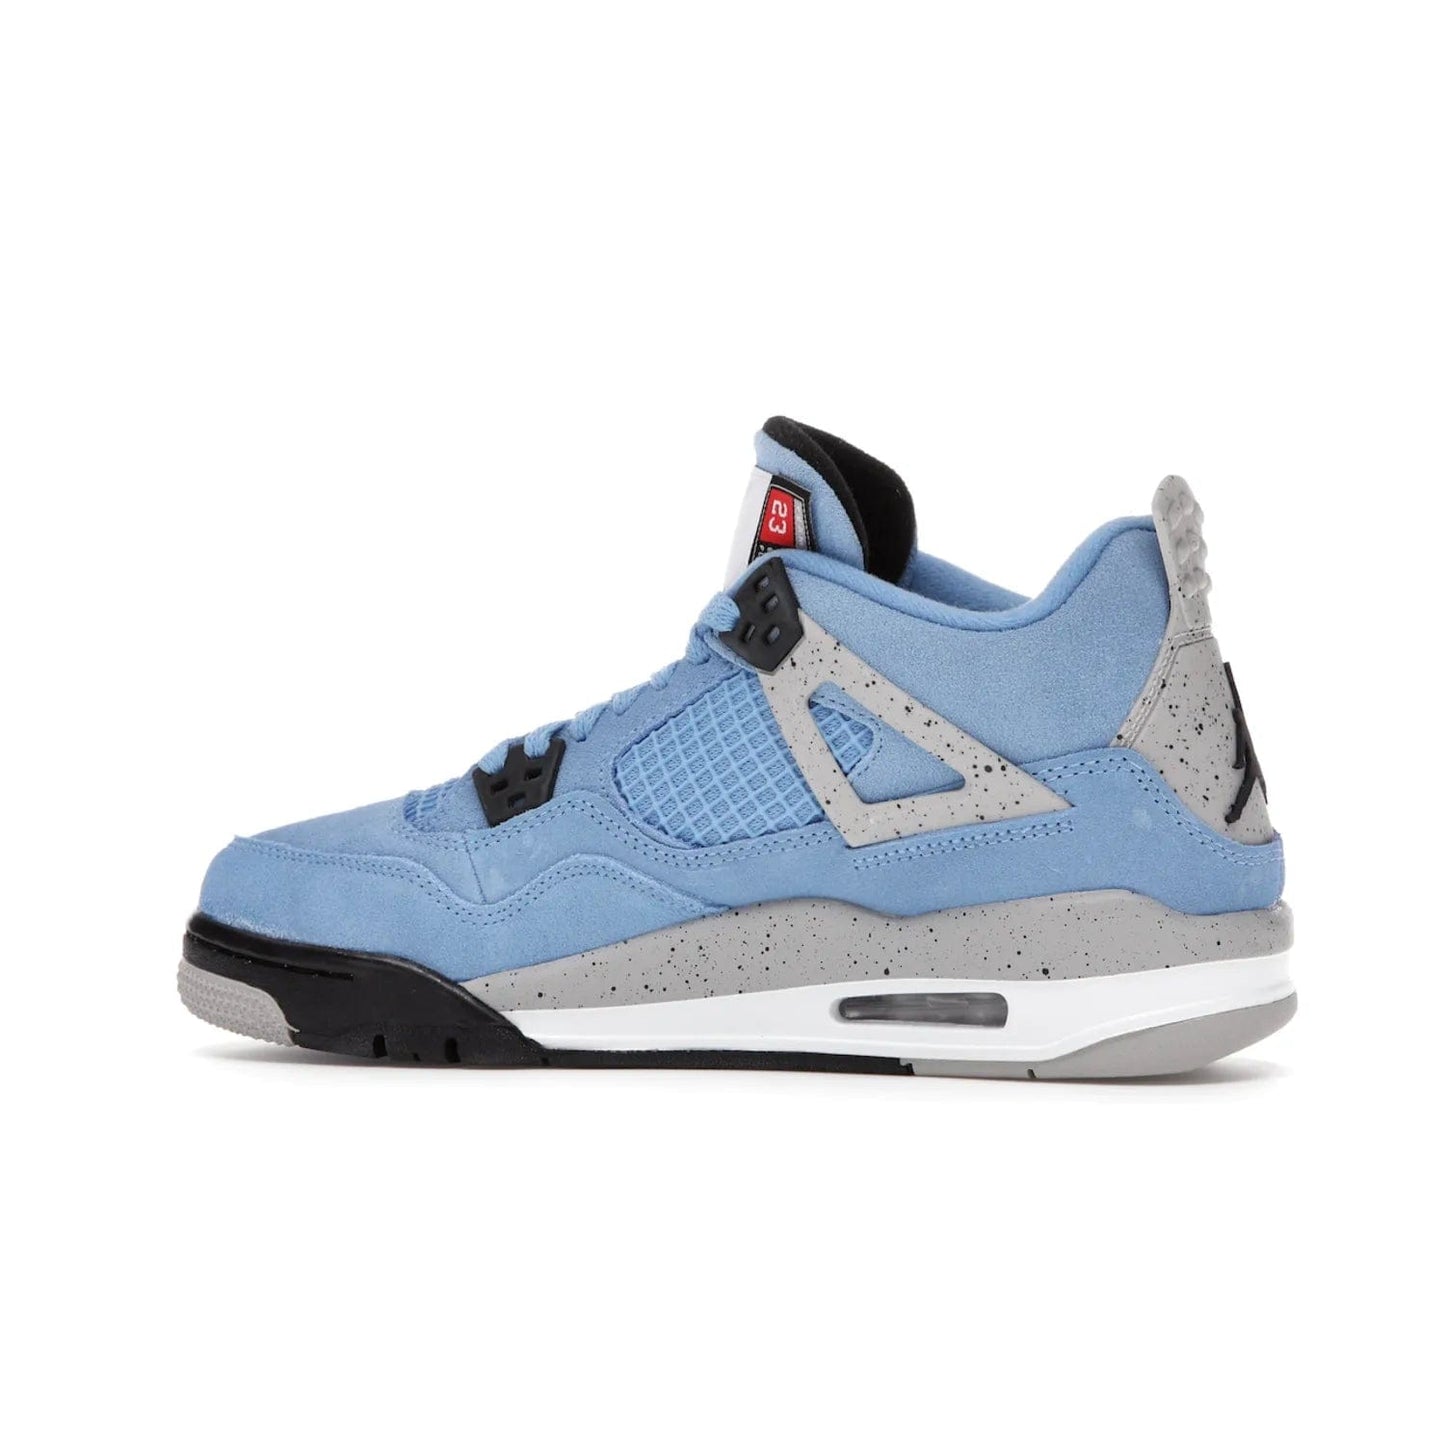 Jordan 4 Retro University Blue (GS) - Image 21 - Only at www.BallersClubKickz.com - Air Jordan 4 Retro University Blue GS: Classic silhouette and vibrant colors. Featuring a suede upper and Jumpman icon, this grade school-size shoe is perfect for collections and retails at $150.